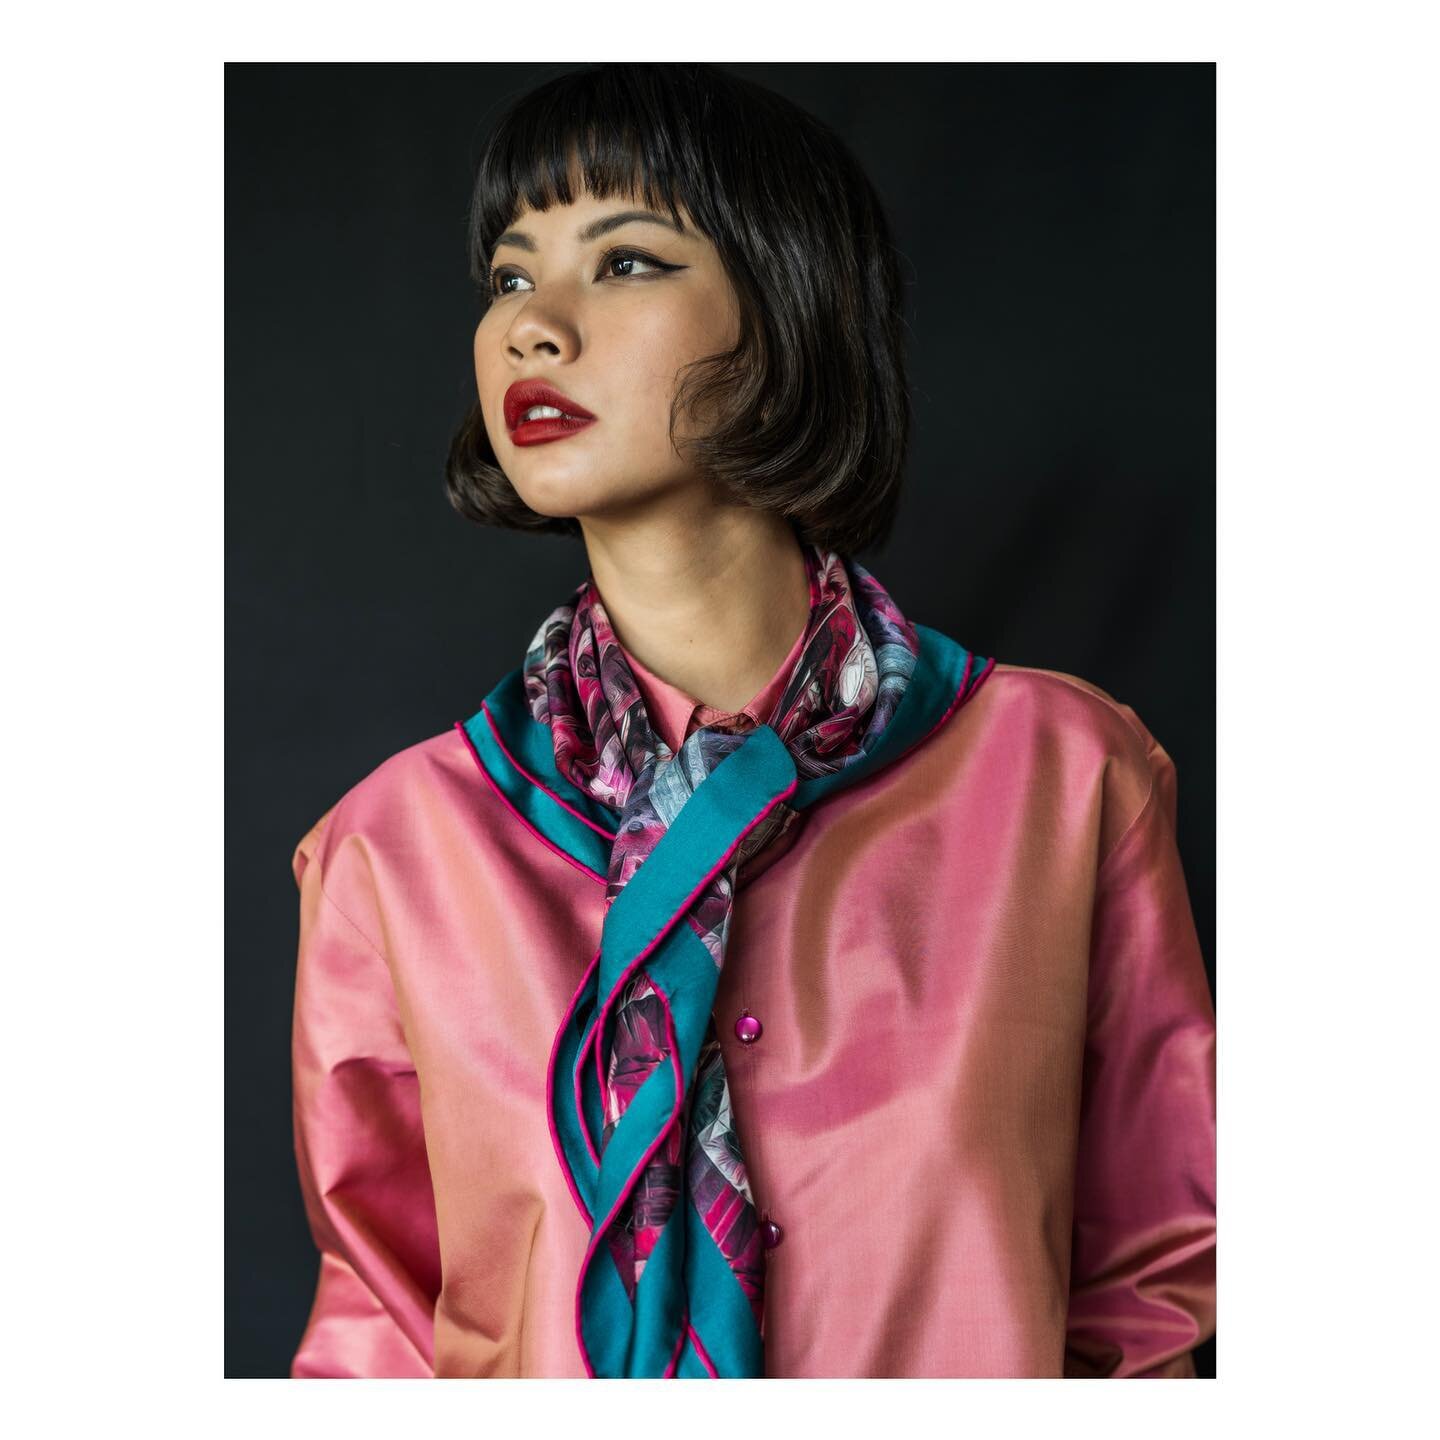 The vaulted ceiling of the cathedral - a spectacular pattern in rose and turquoise hues - hush - its peaceful in here. WE MAKE WEARABLE ART - luxury silk scarves in limited editions. Stunning patterns and colours. Aubrey Kurlansky Originals. Reach ou